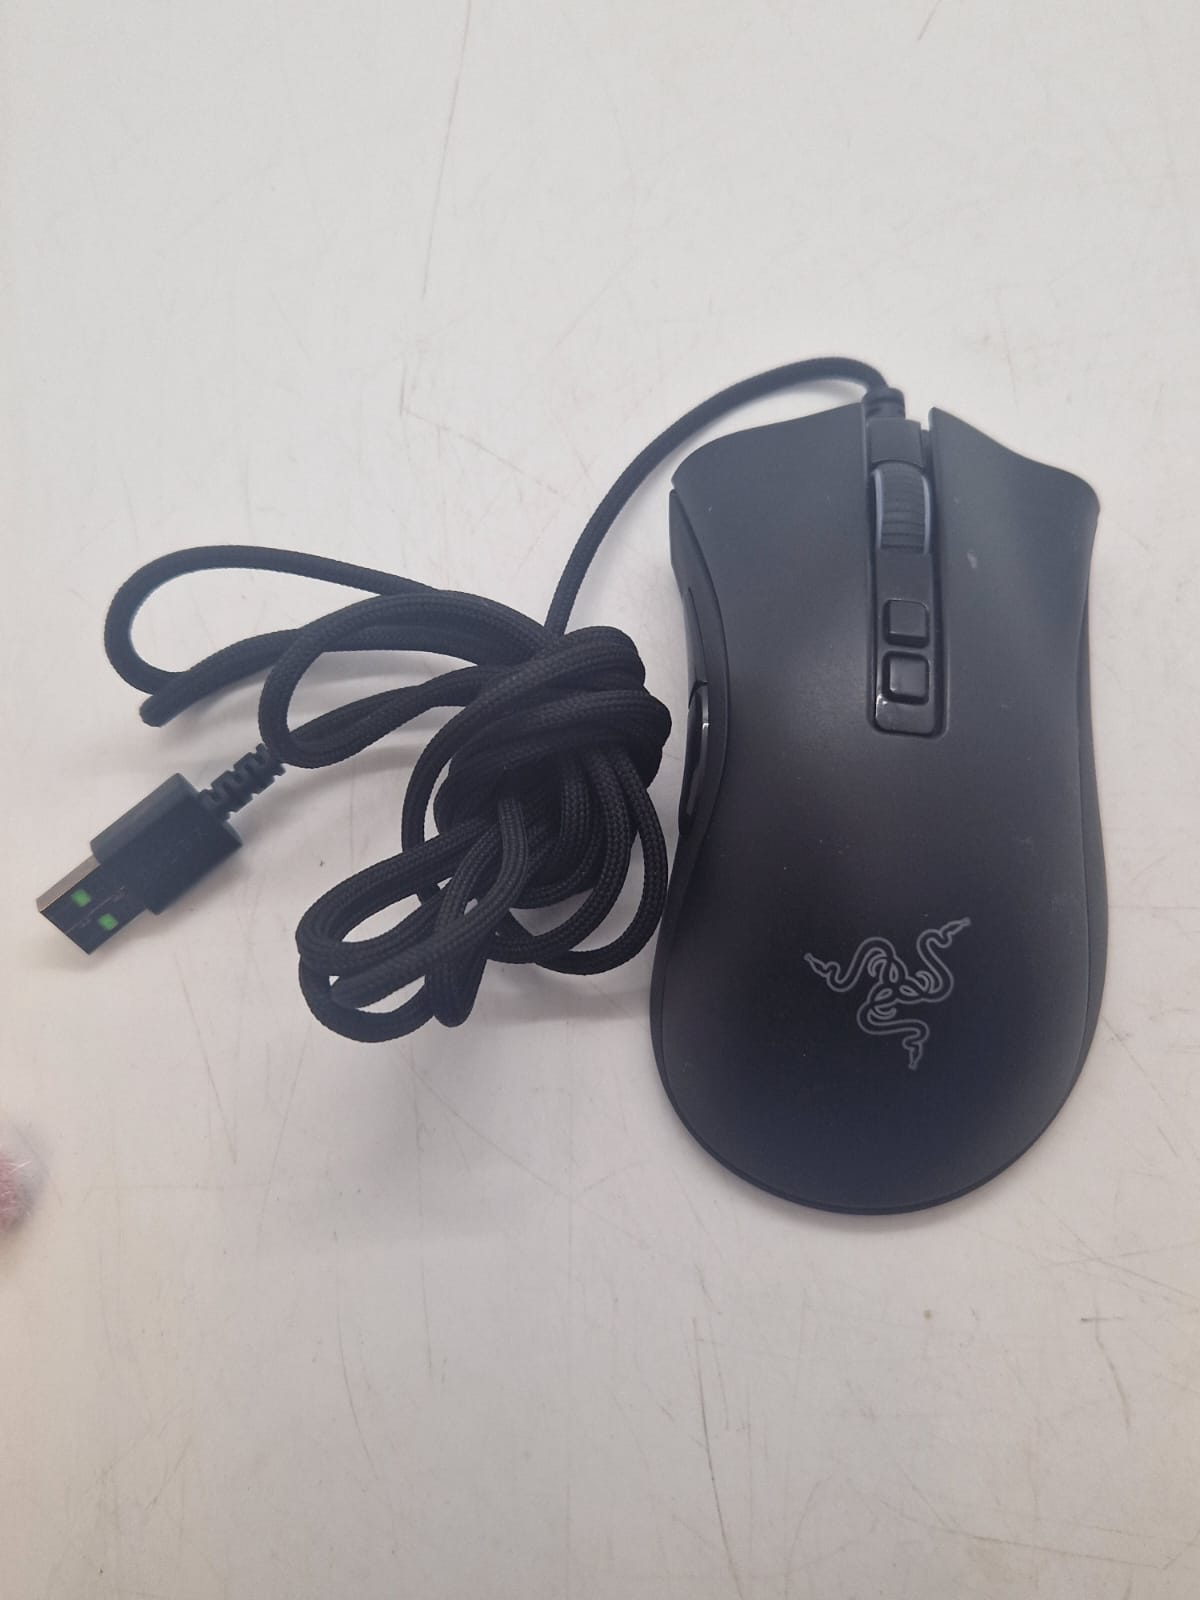 Mouse - Computer Accessories - Computing